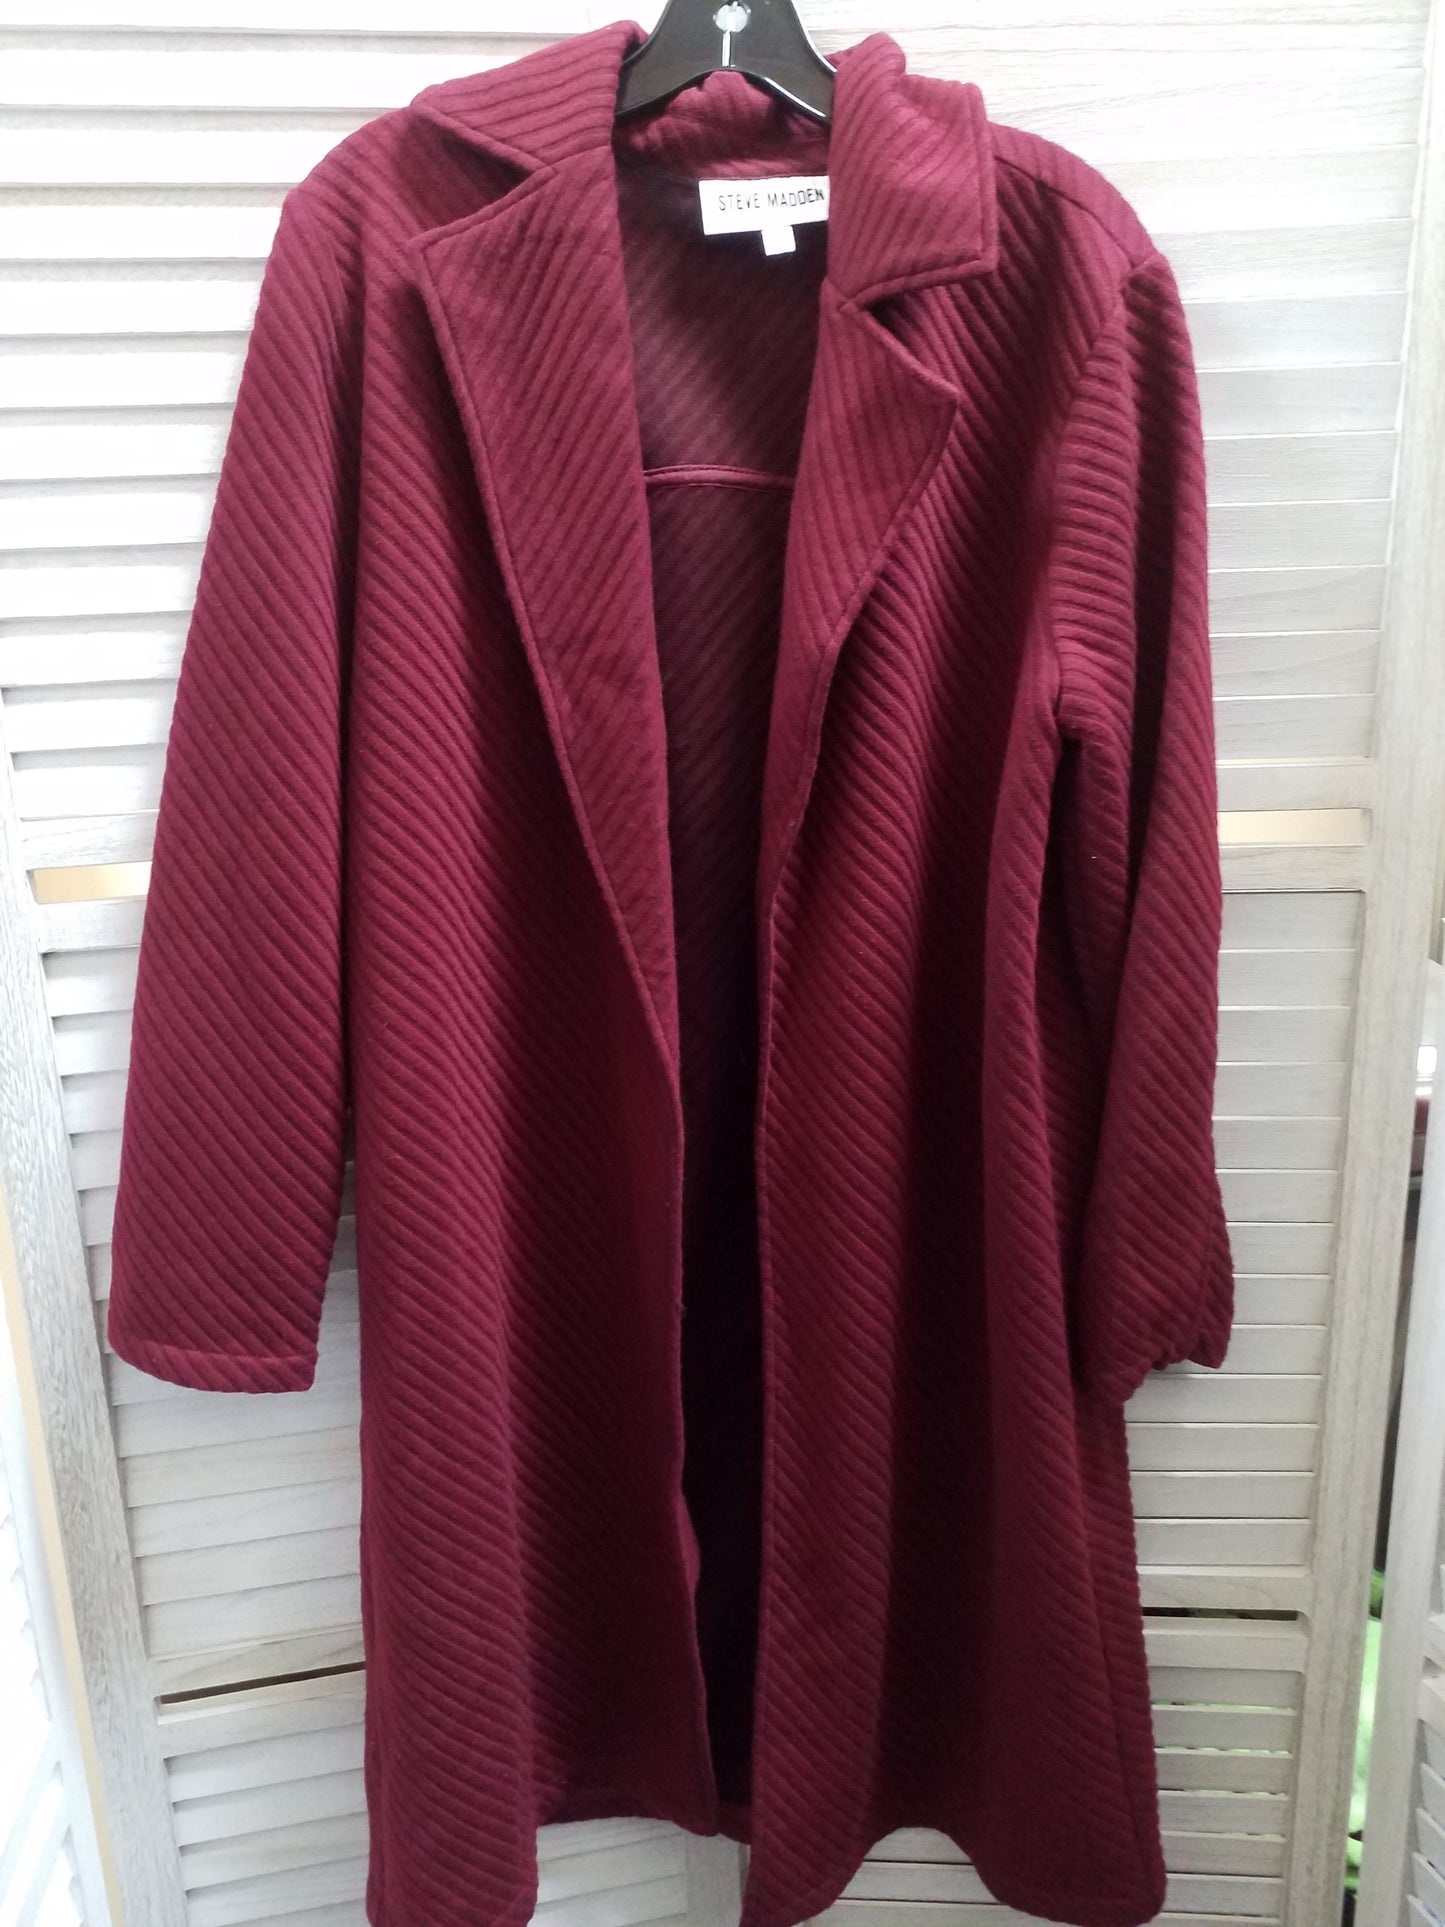 Coat Other By Steve Madden  Size: L